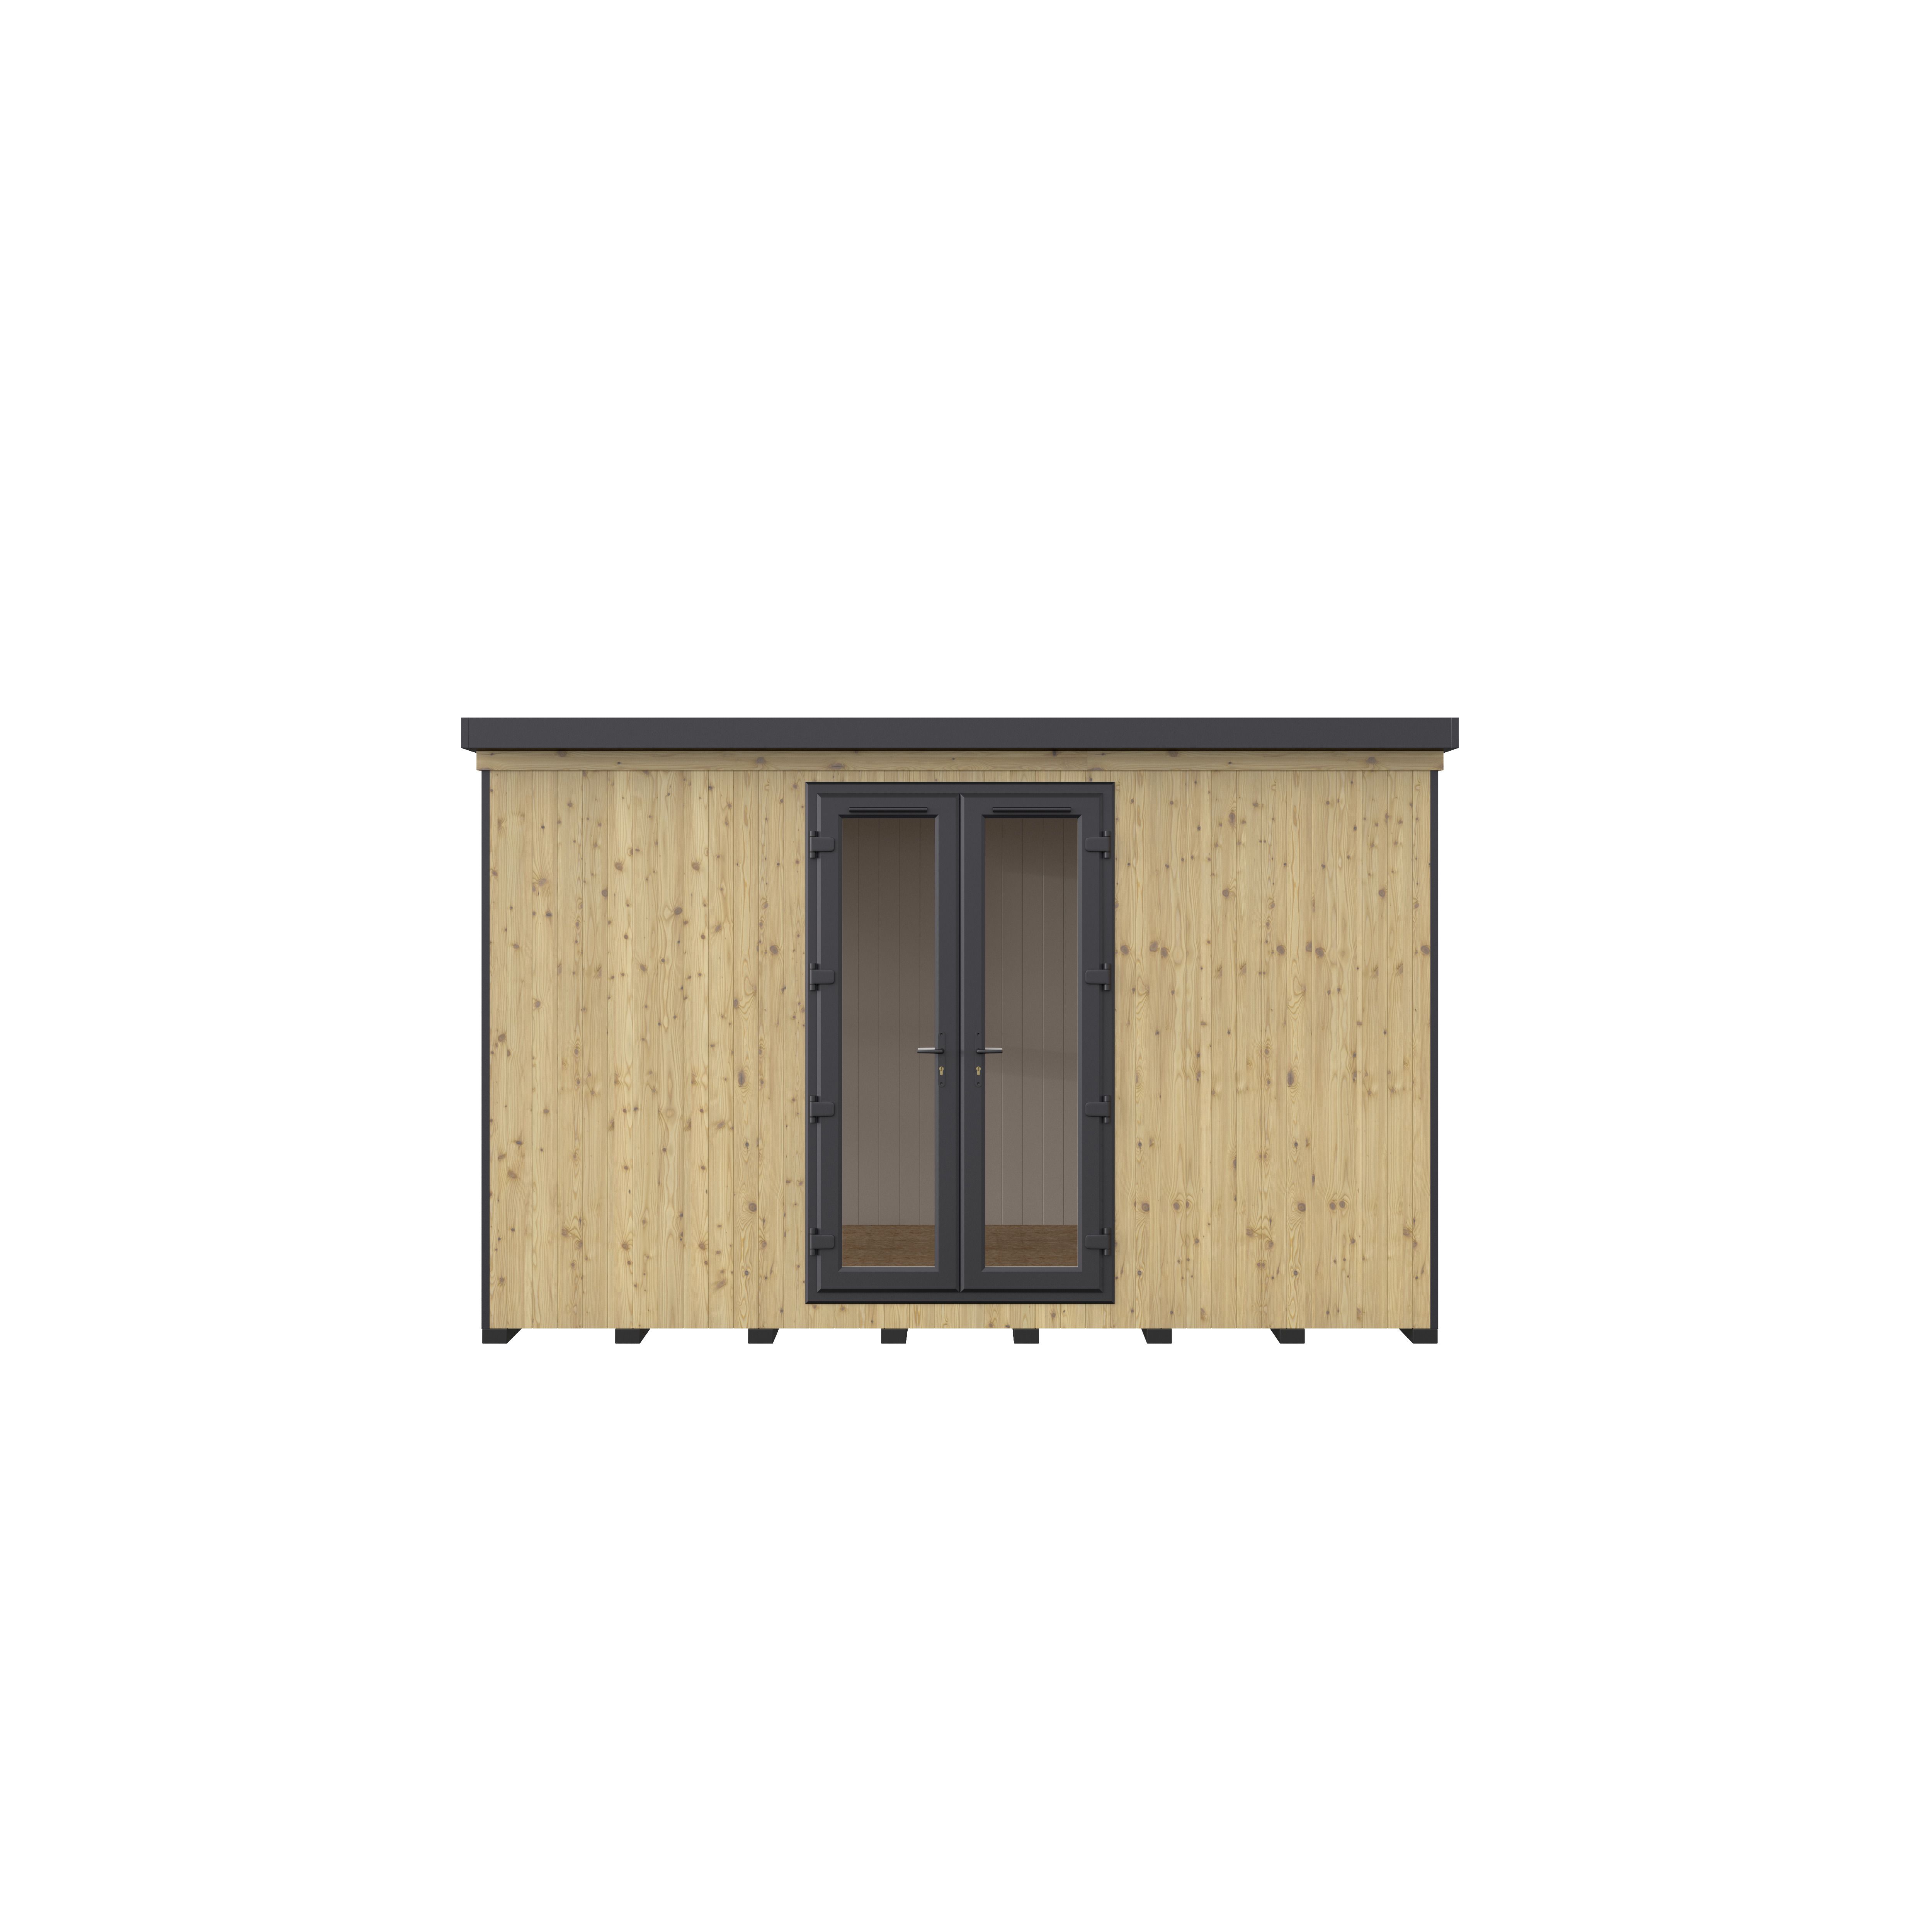 GoodHome Semora 10x12 ft with Double door Pent Garden room 3m x 3.8m (Base included) - Assembly service of building & foundations included